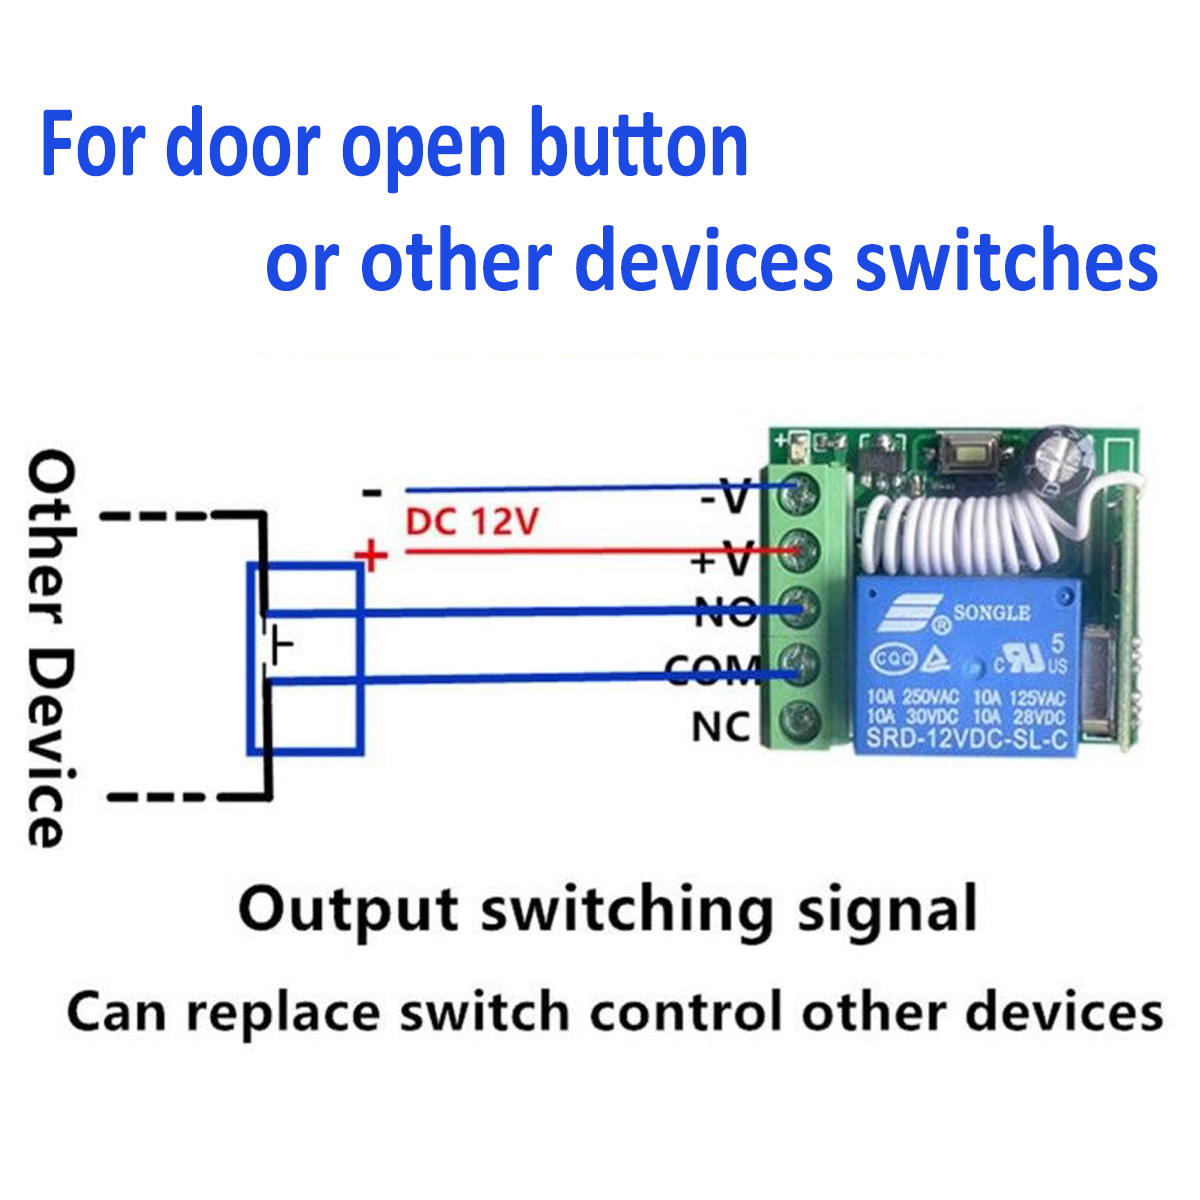 433Mhz-DC12V-1CH-Wireless-Remote-Control-Switch-Relay-Receiver-Module--2-RF-Transmitter-1326823-1